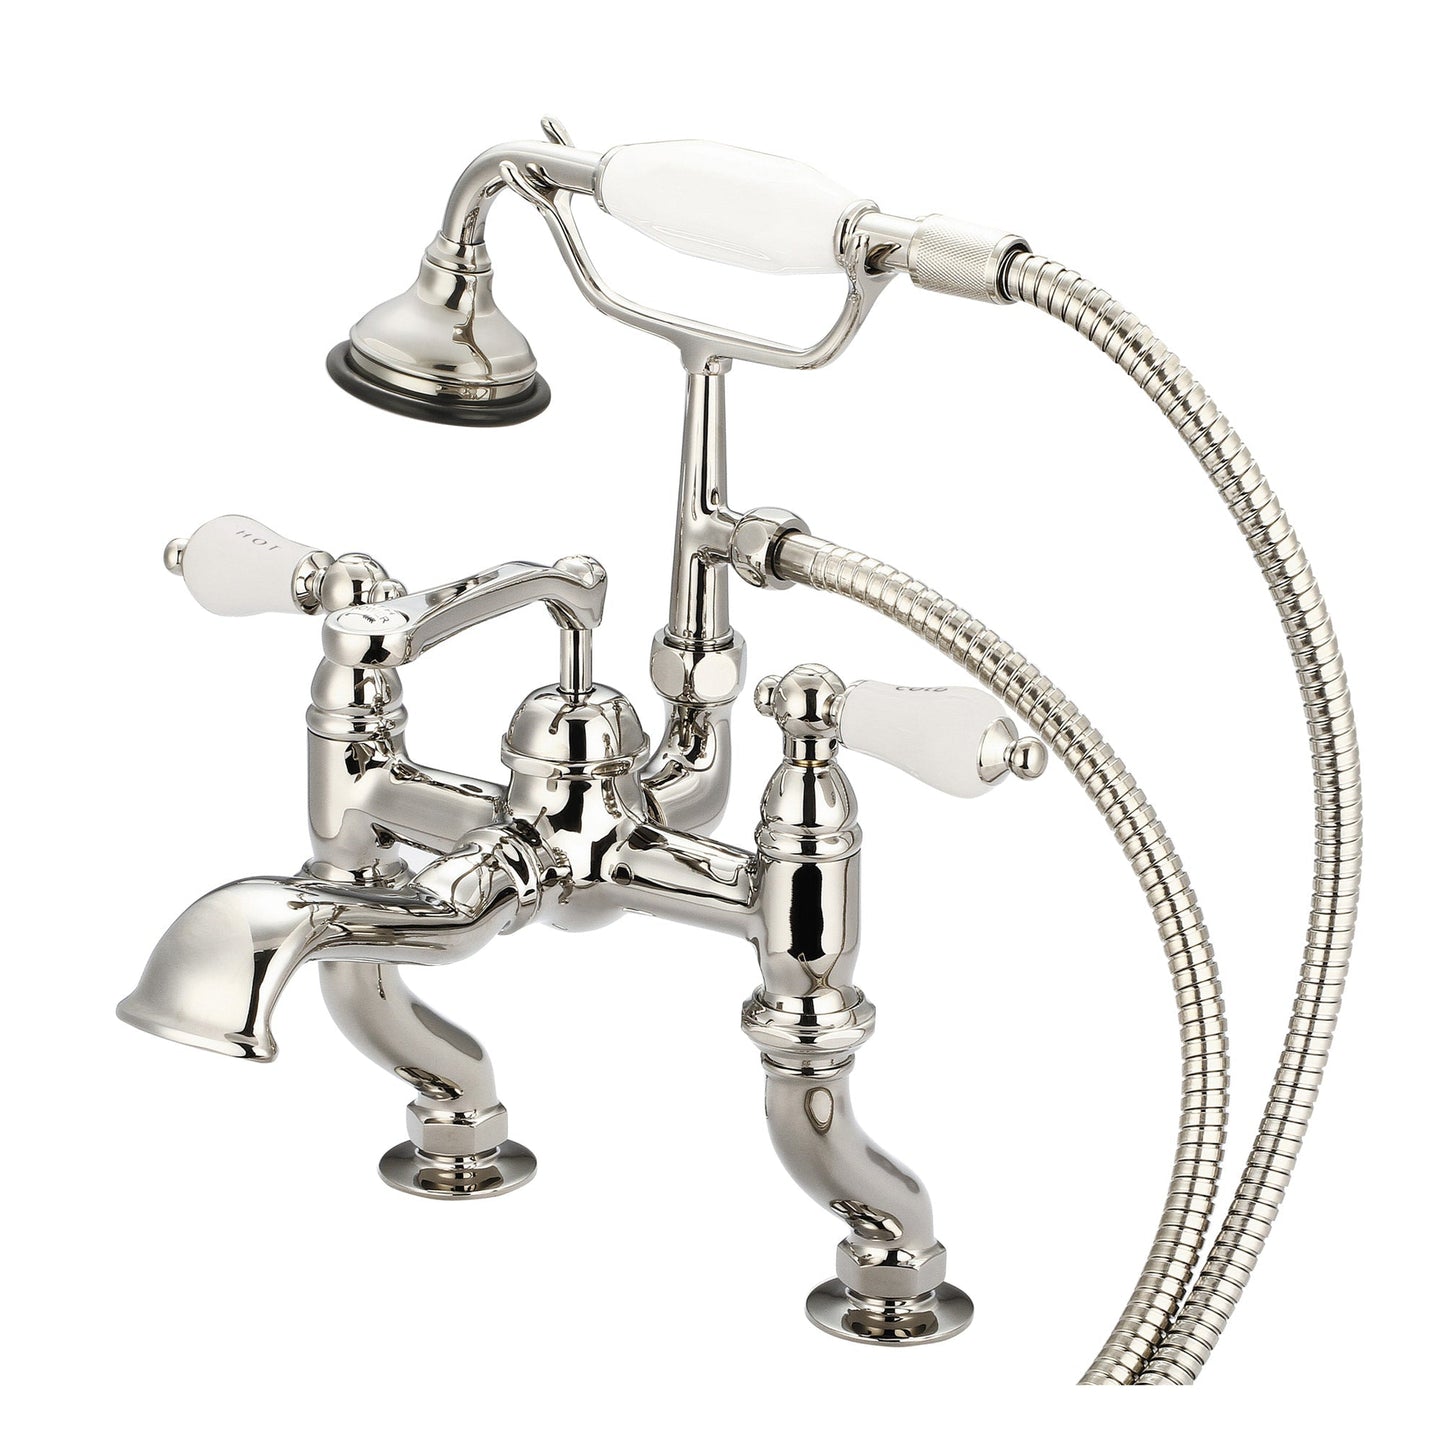 Water Creation Vintage Classic Adjustable Center Deck Mount Tub F6-0004 3.25" Ivory Solid Brass Faucet With Handheld Shower And Porcelain Lever Handles, Hot And Cold Labels Included